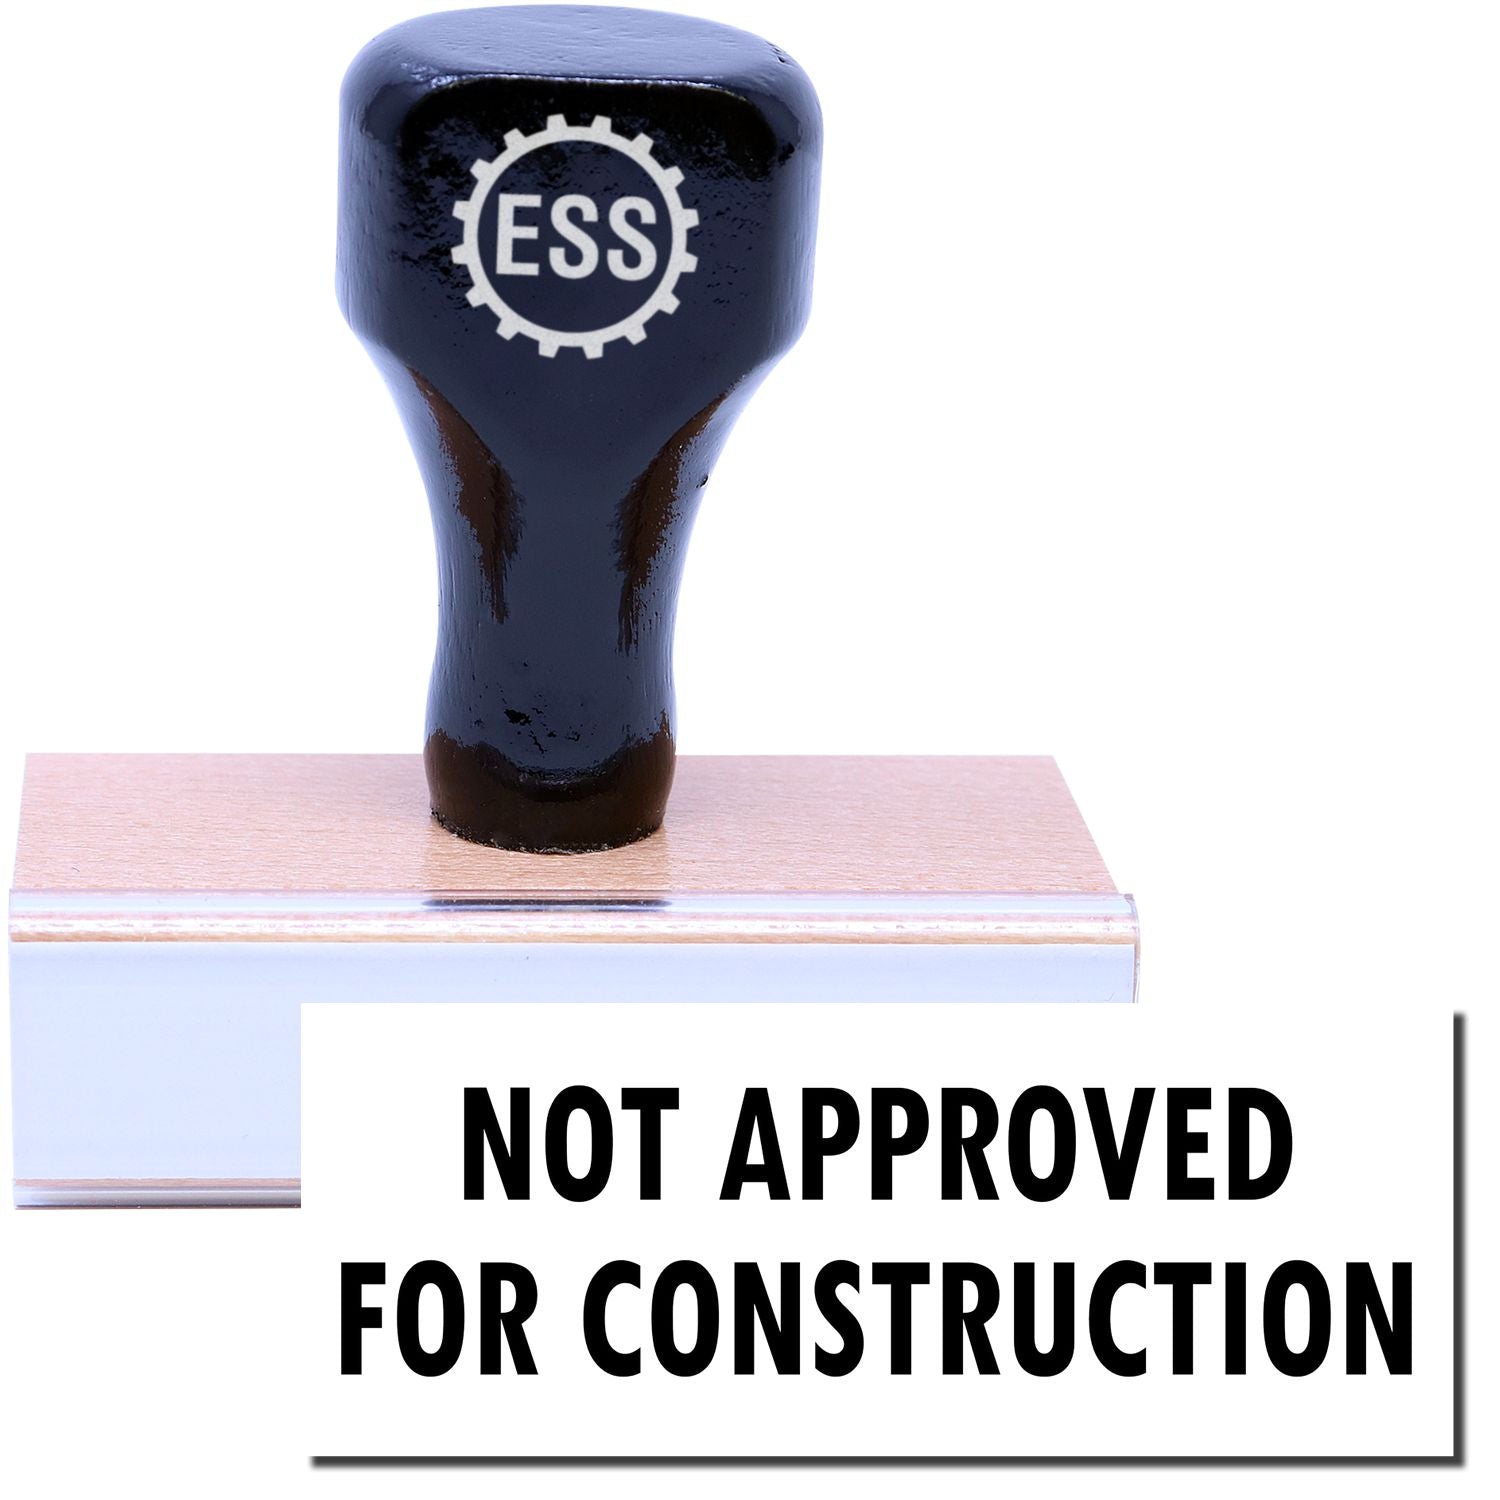 A stock office rubber stamp with a stamped image showing how the text "NOT APPROVED FOR CONSTRUCTION" in a large font is displayed after stamping.